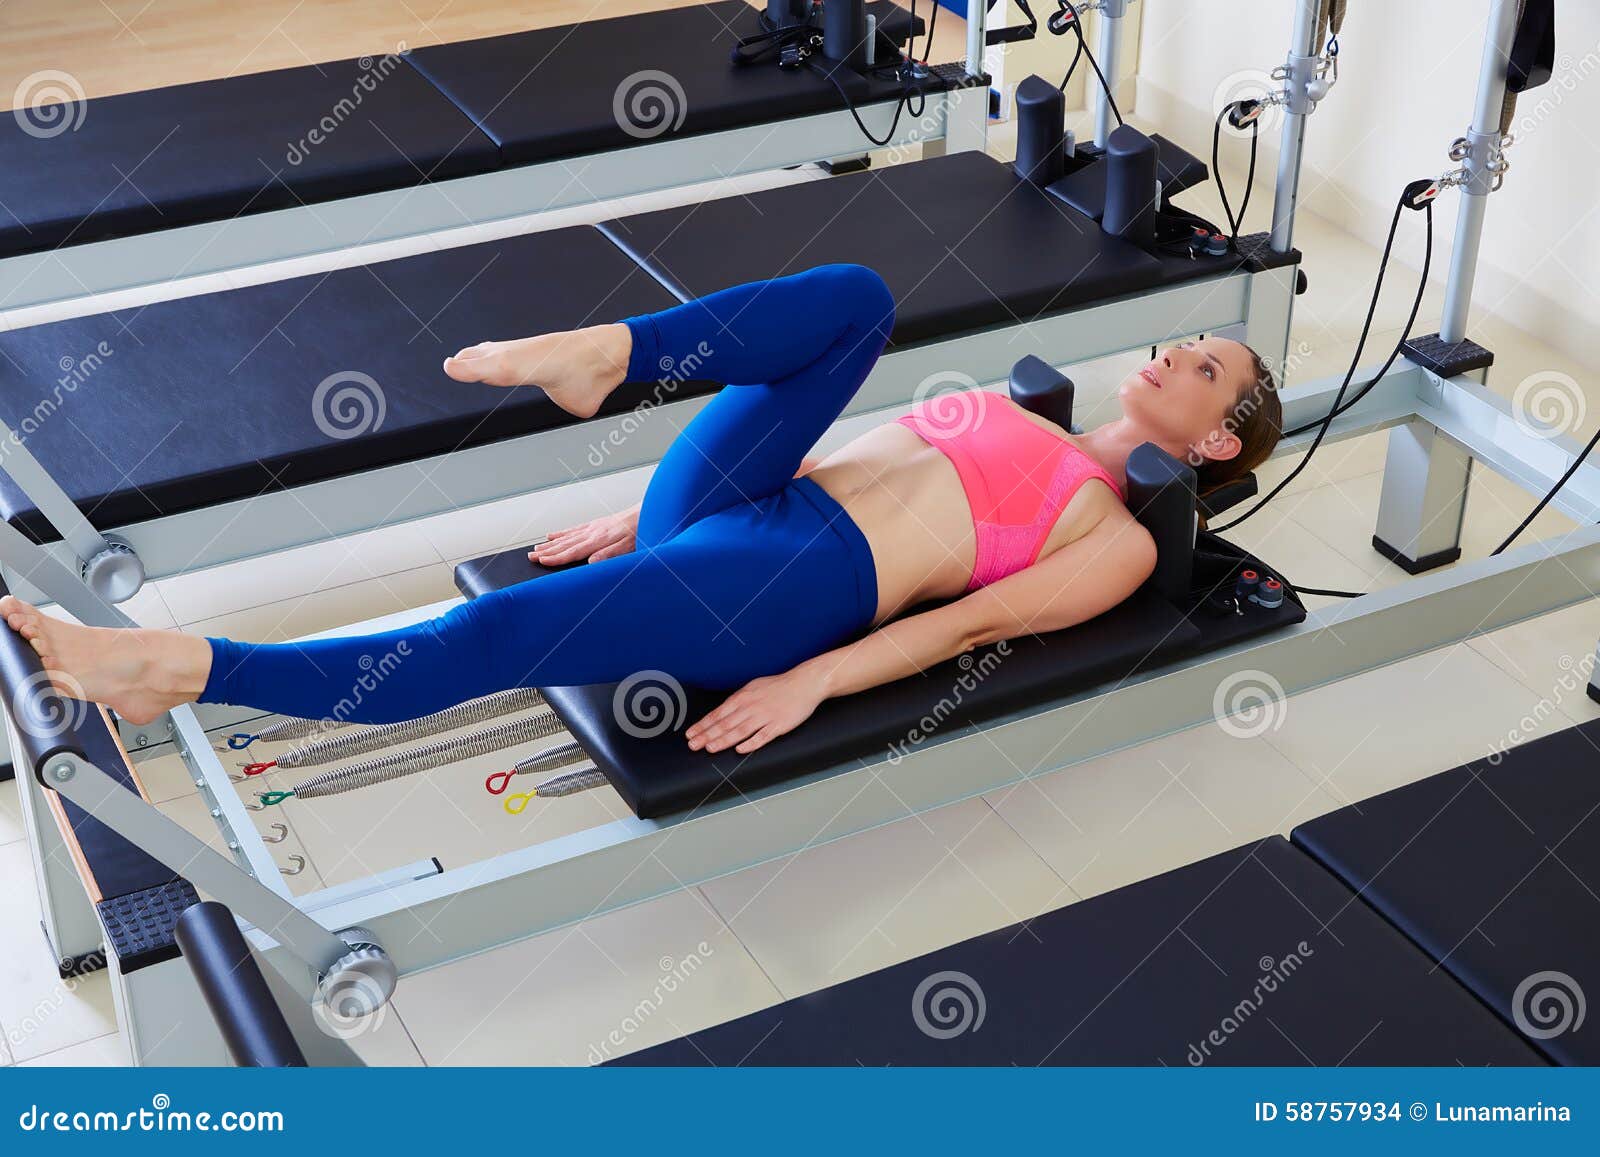 pilates reformer woman foot work exercise